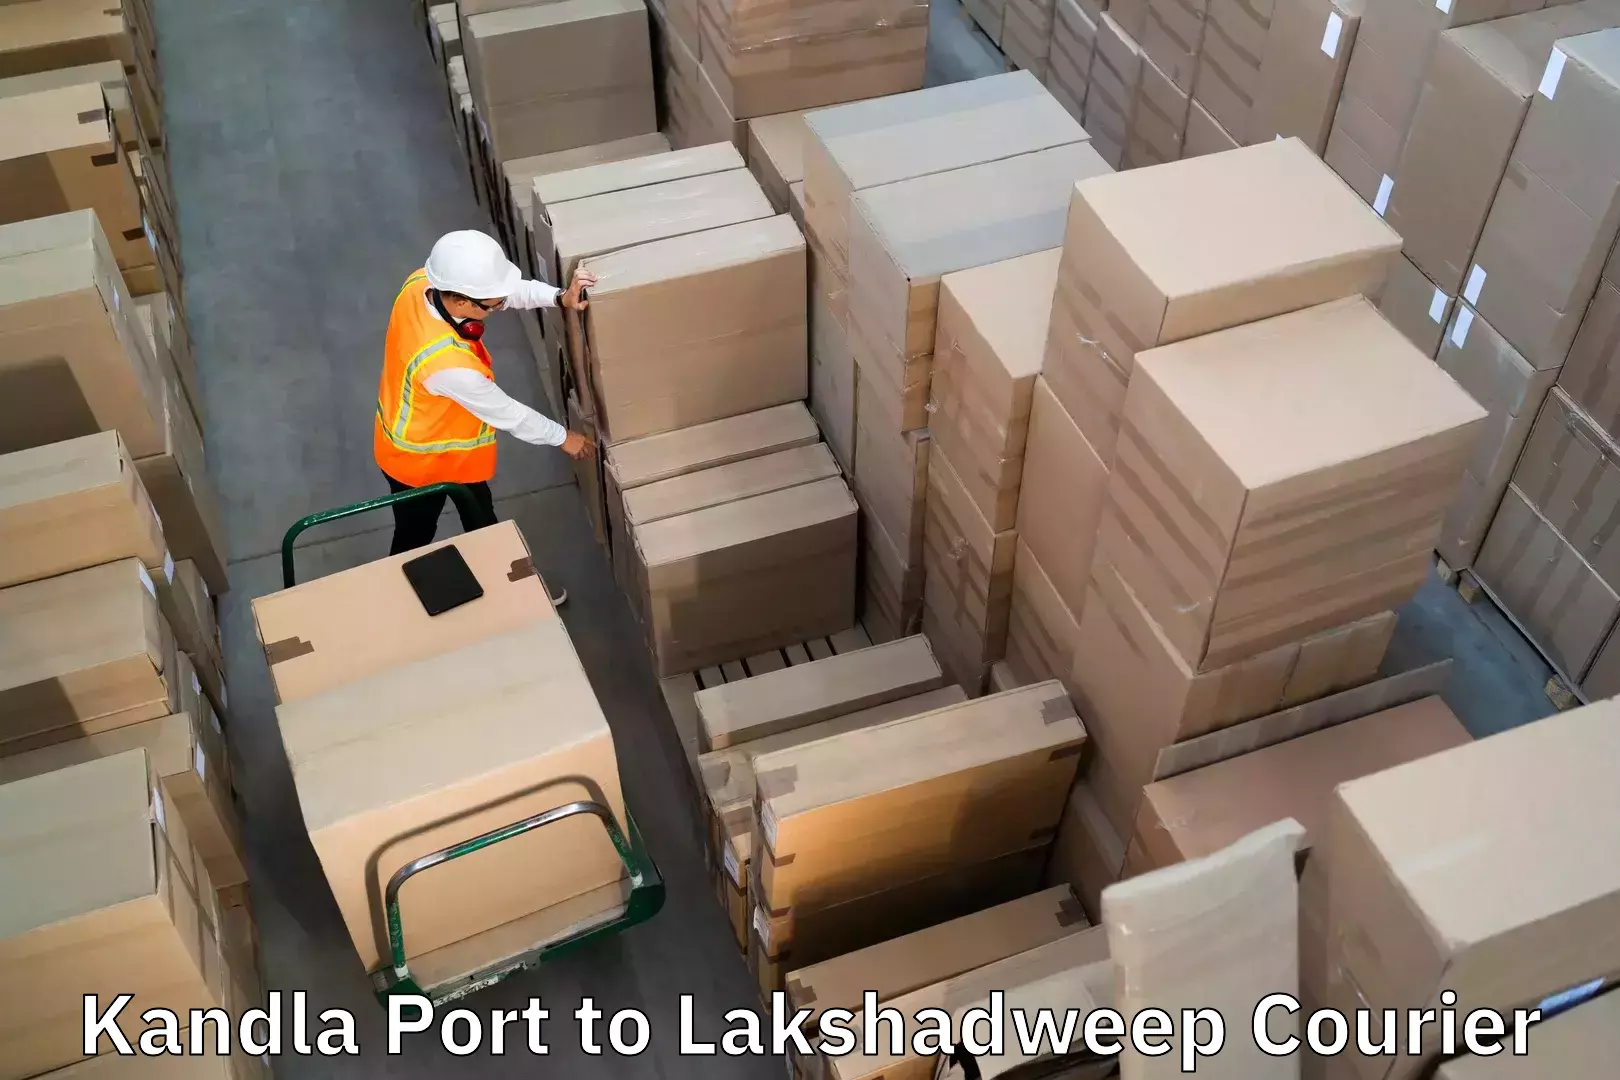 Luggage delivery rates in Kandla Port to Lakshadweep